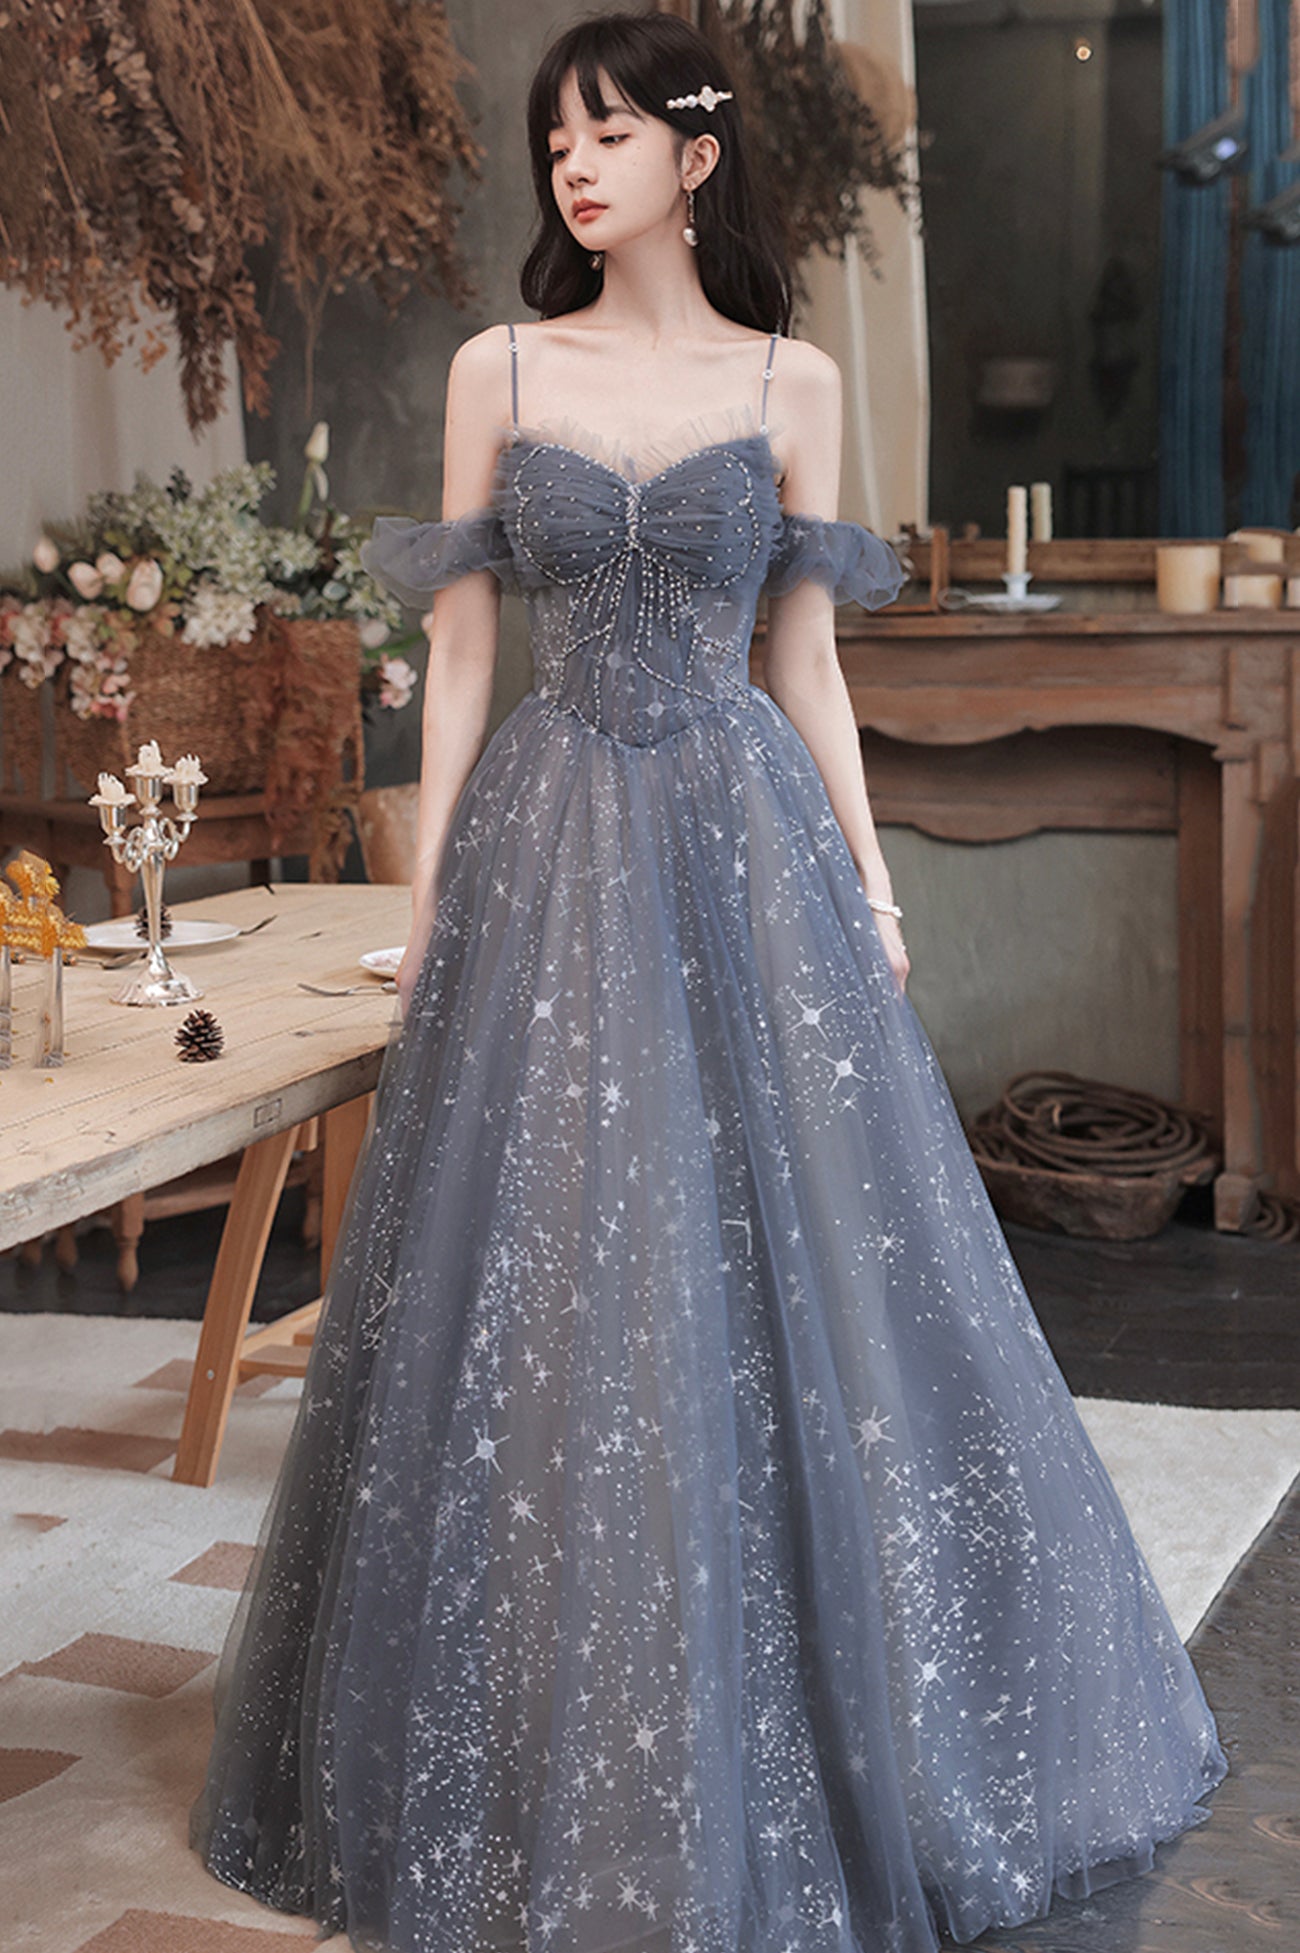 A-Line Spaghetti Straps Tulle Long Prom Dress, Cute A-Line Evening Dress